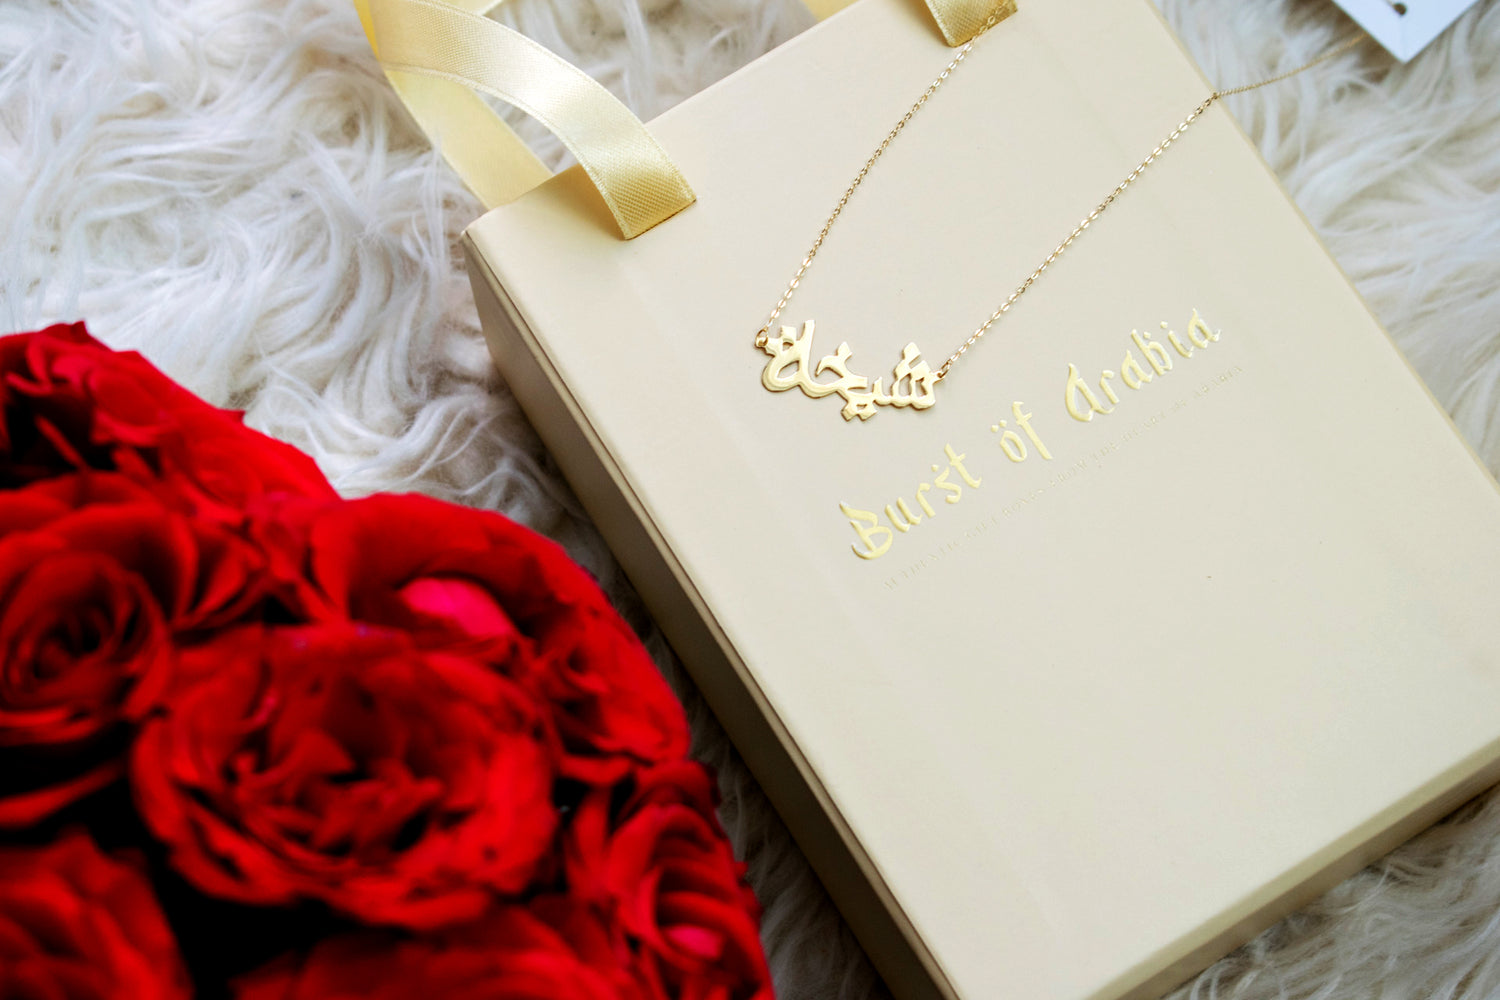 Custom-made 18 carat gold jewelry - for when you want gifting with a personal touch. Personalize  each and every piece to say Happy Birthday, Get Well Soon, Thank You or Congratulations.  Handcrafted in Dubai